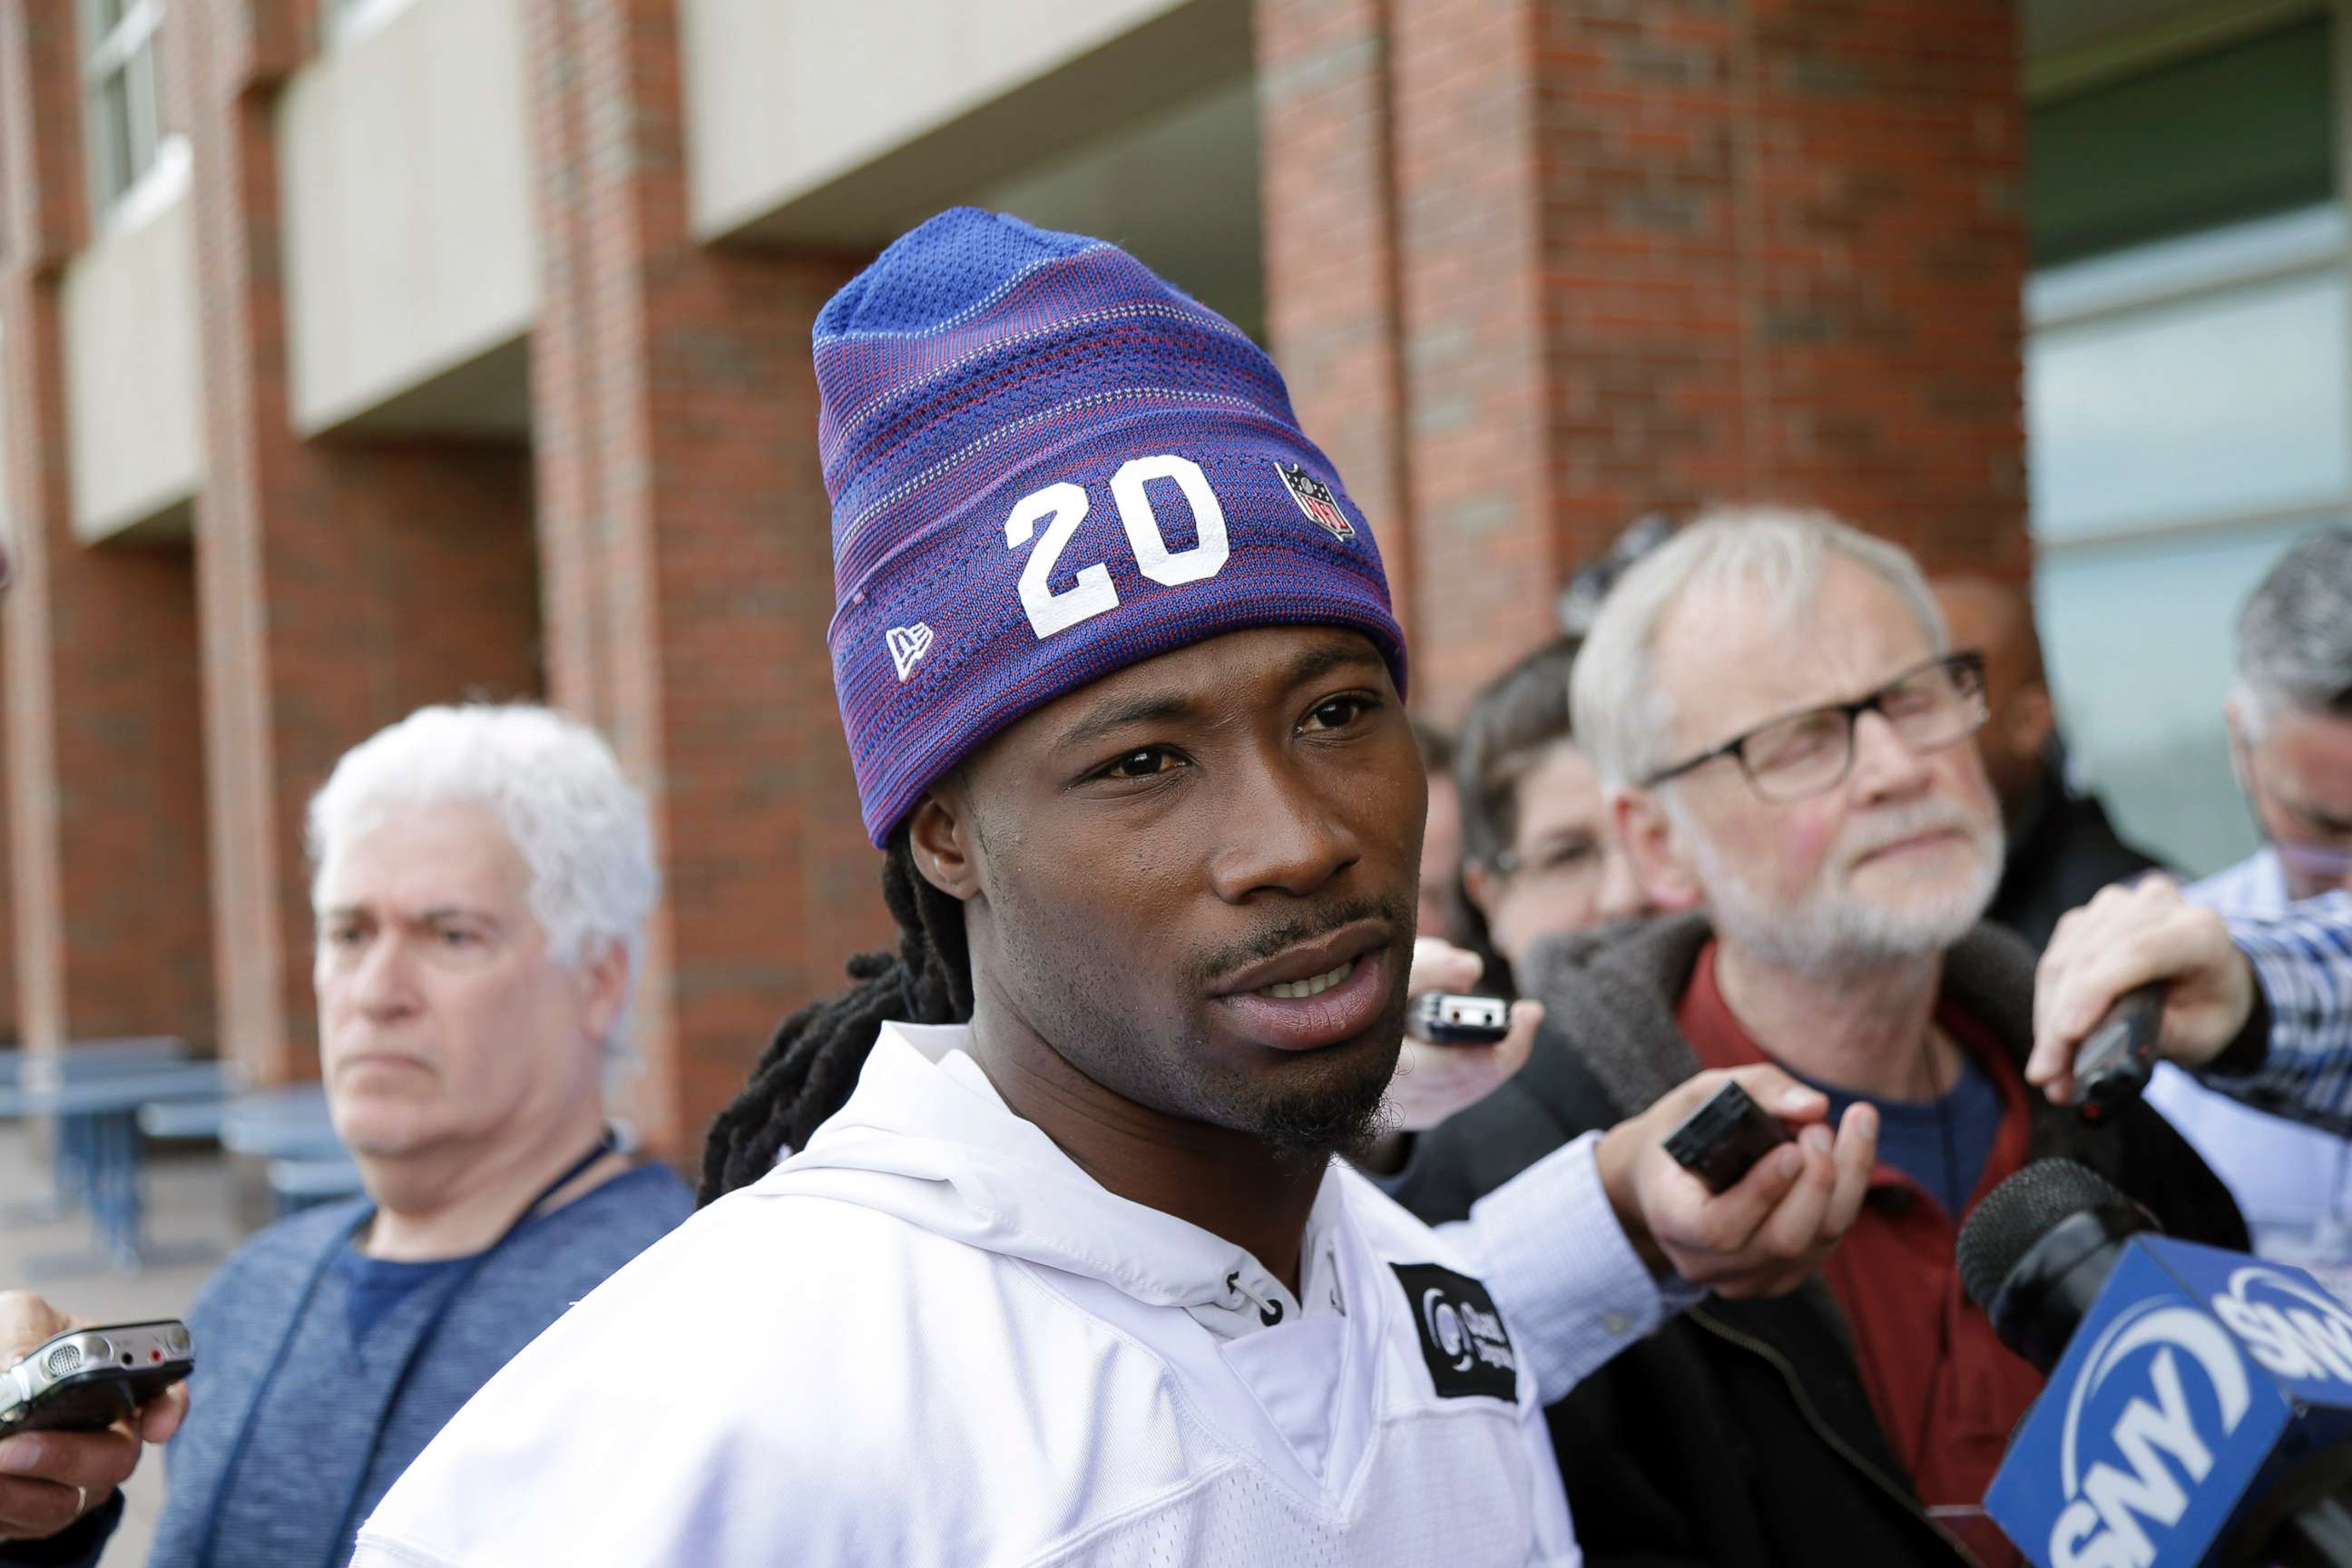 PHOTO: New York Giants' Janoris Jenkins speaks to reporters before an NFL football training camp in East Rutherford, N.J., April 24, 2018.